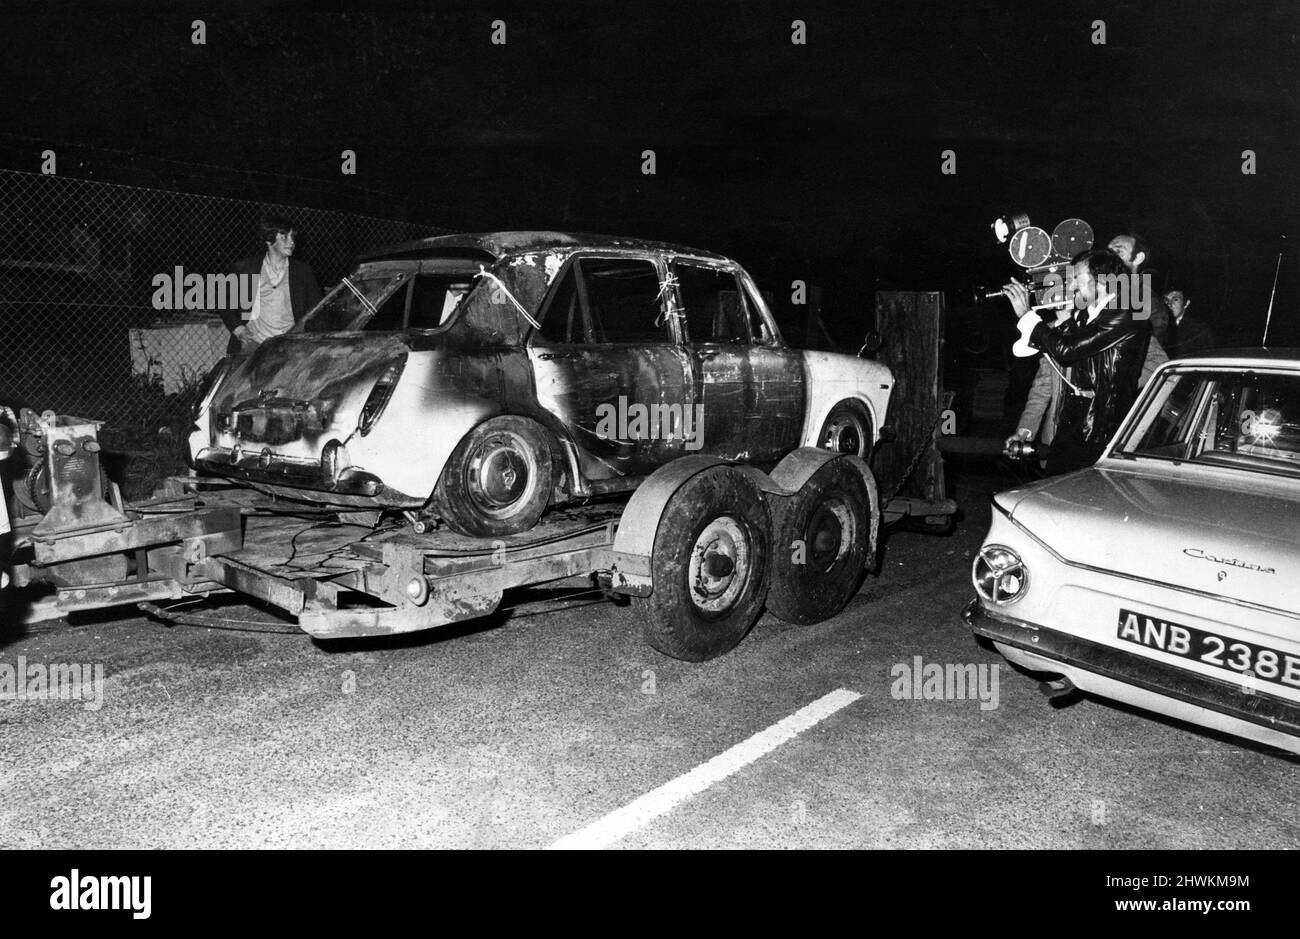 The burnt out car found in Tilehurst after Detective Constable Ian Coward was shot in the head and body by a man who jumped out of a car. Pictured, all that remains of the gunman's getaway car, the shell of the Austin 1100 being towed away. The gunman is believed to have set fire to the car in Tilehurst. 27th June 1971. Stock Photo